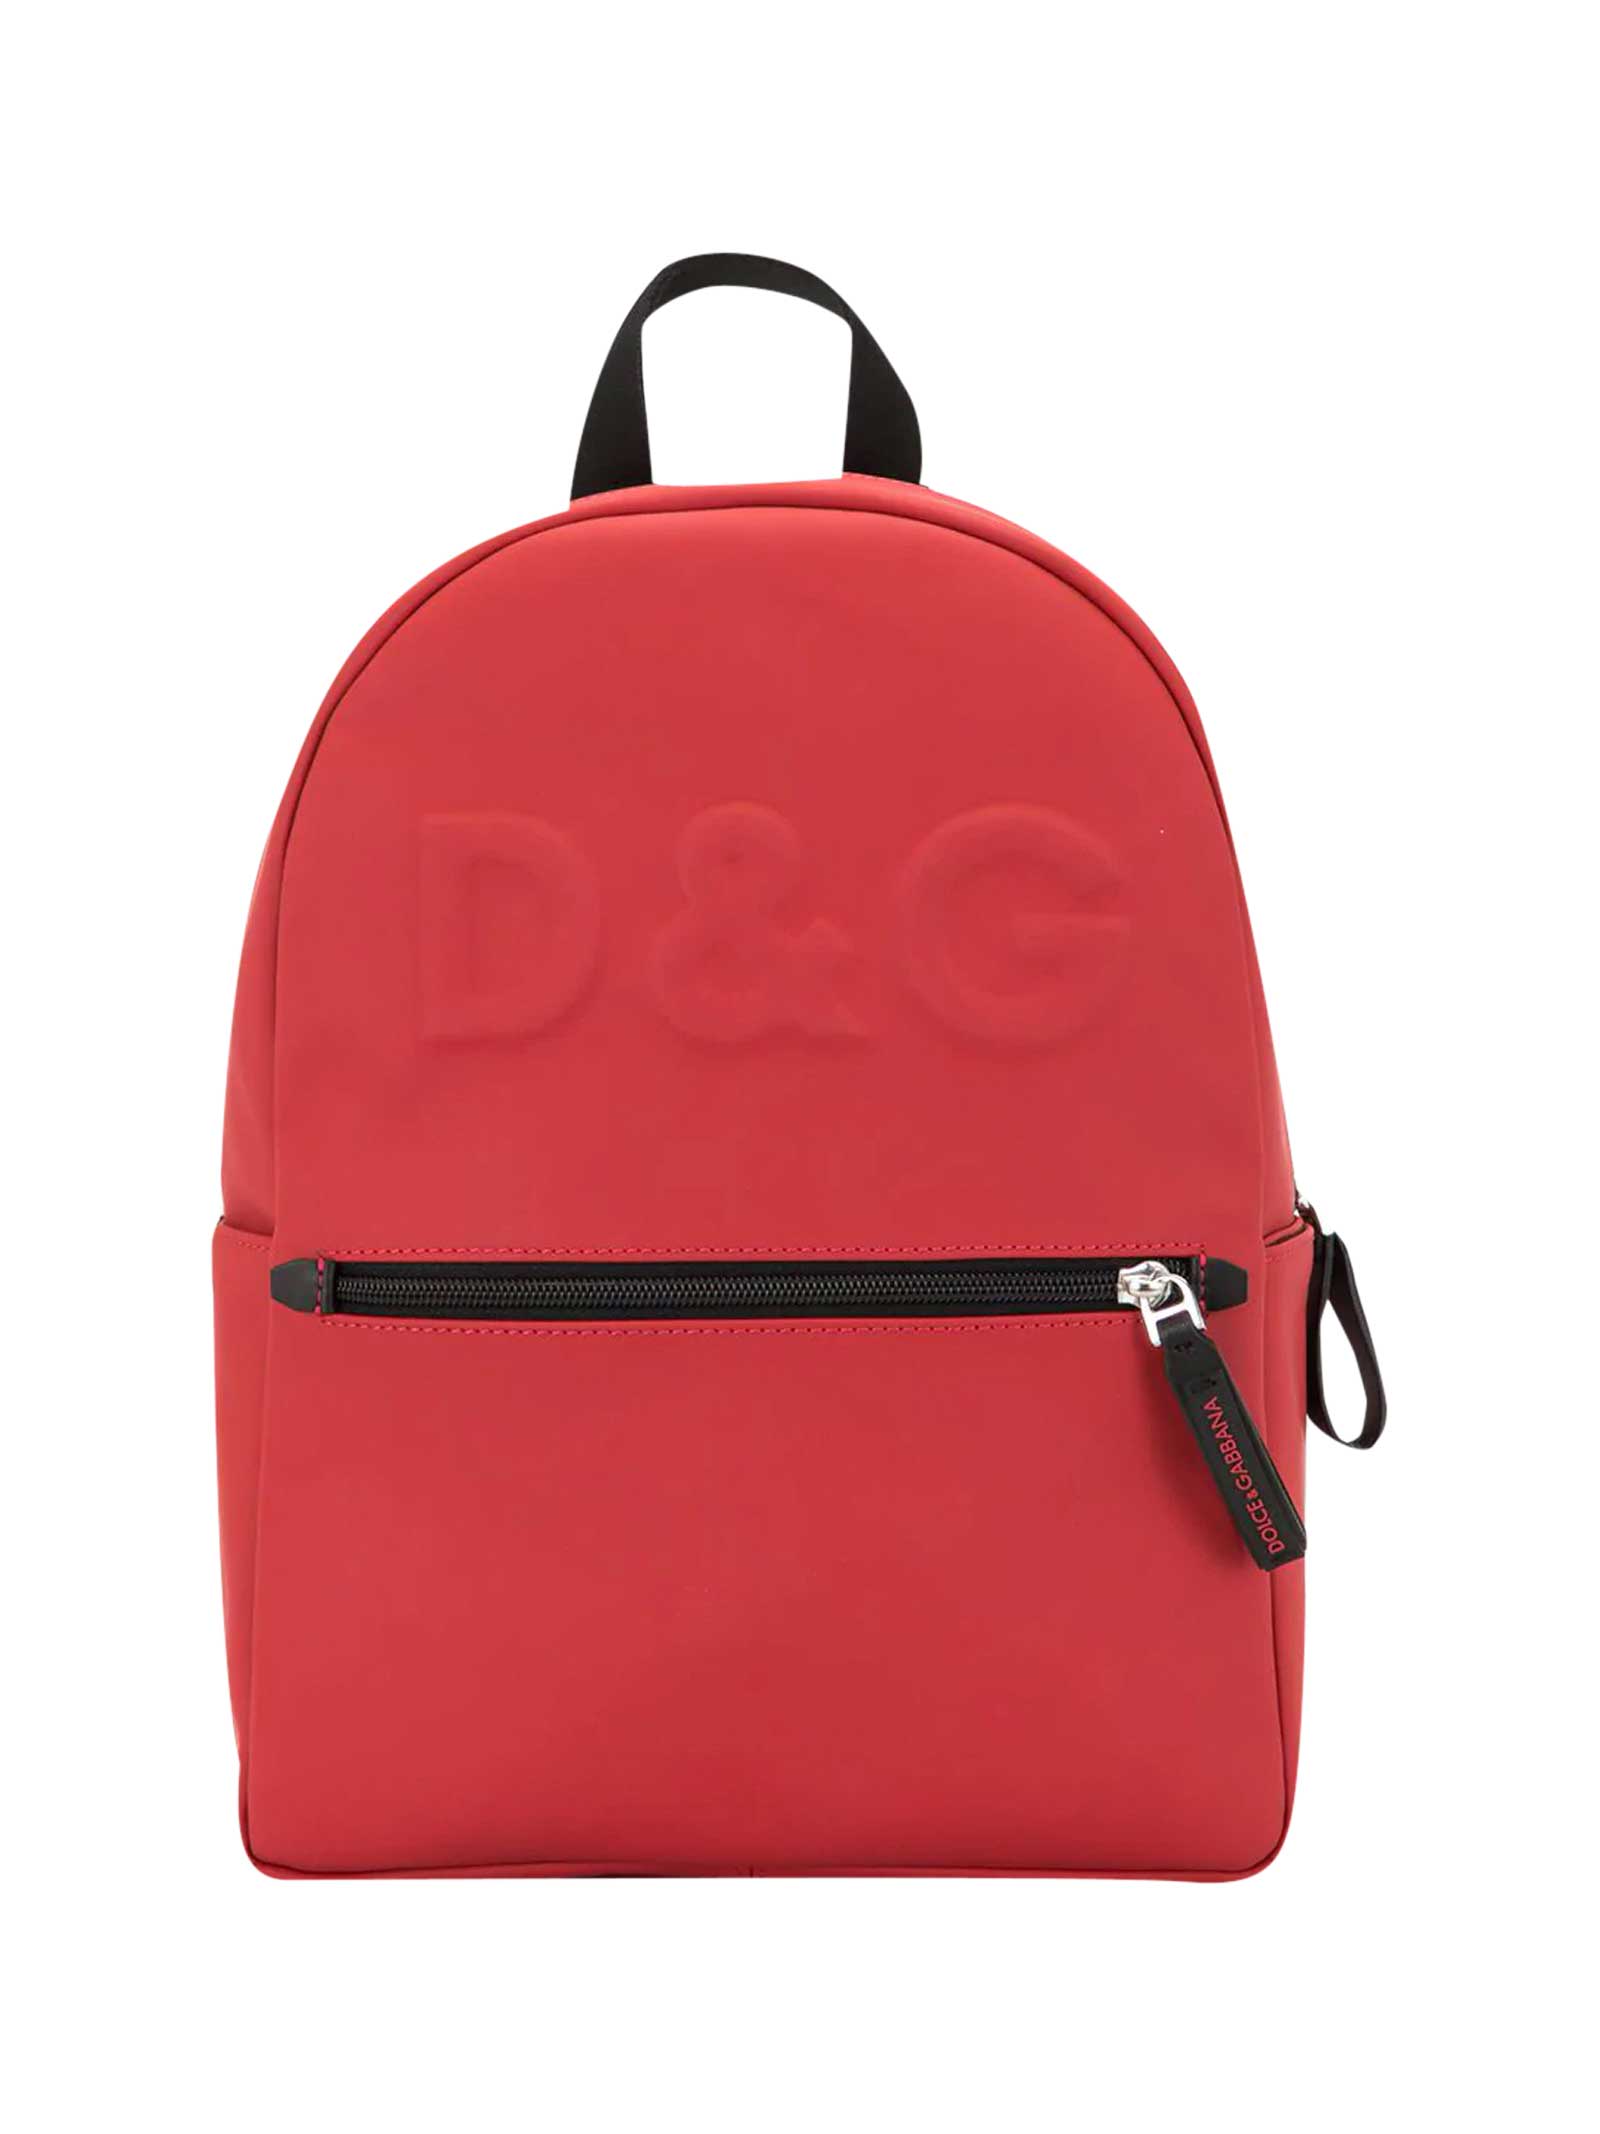 Dolce & Gabbana Red Backpack